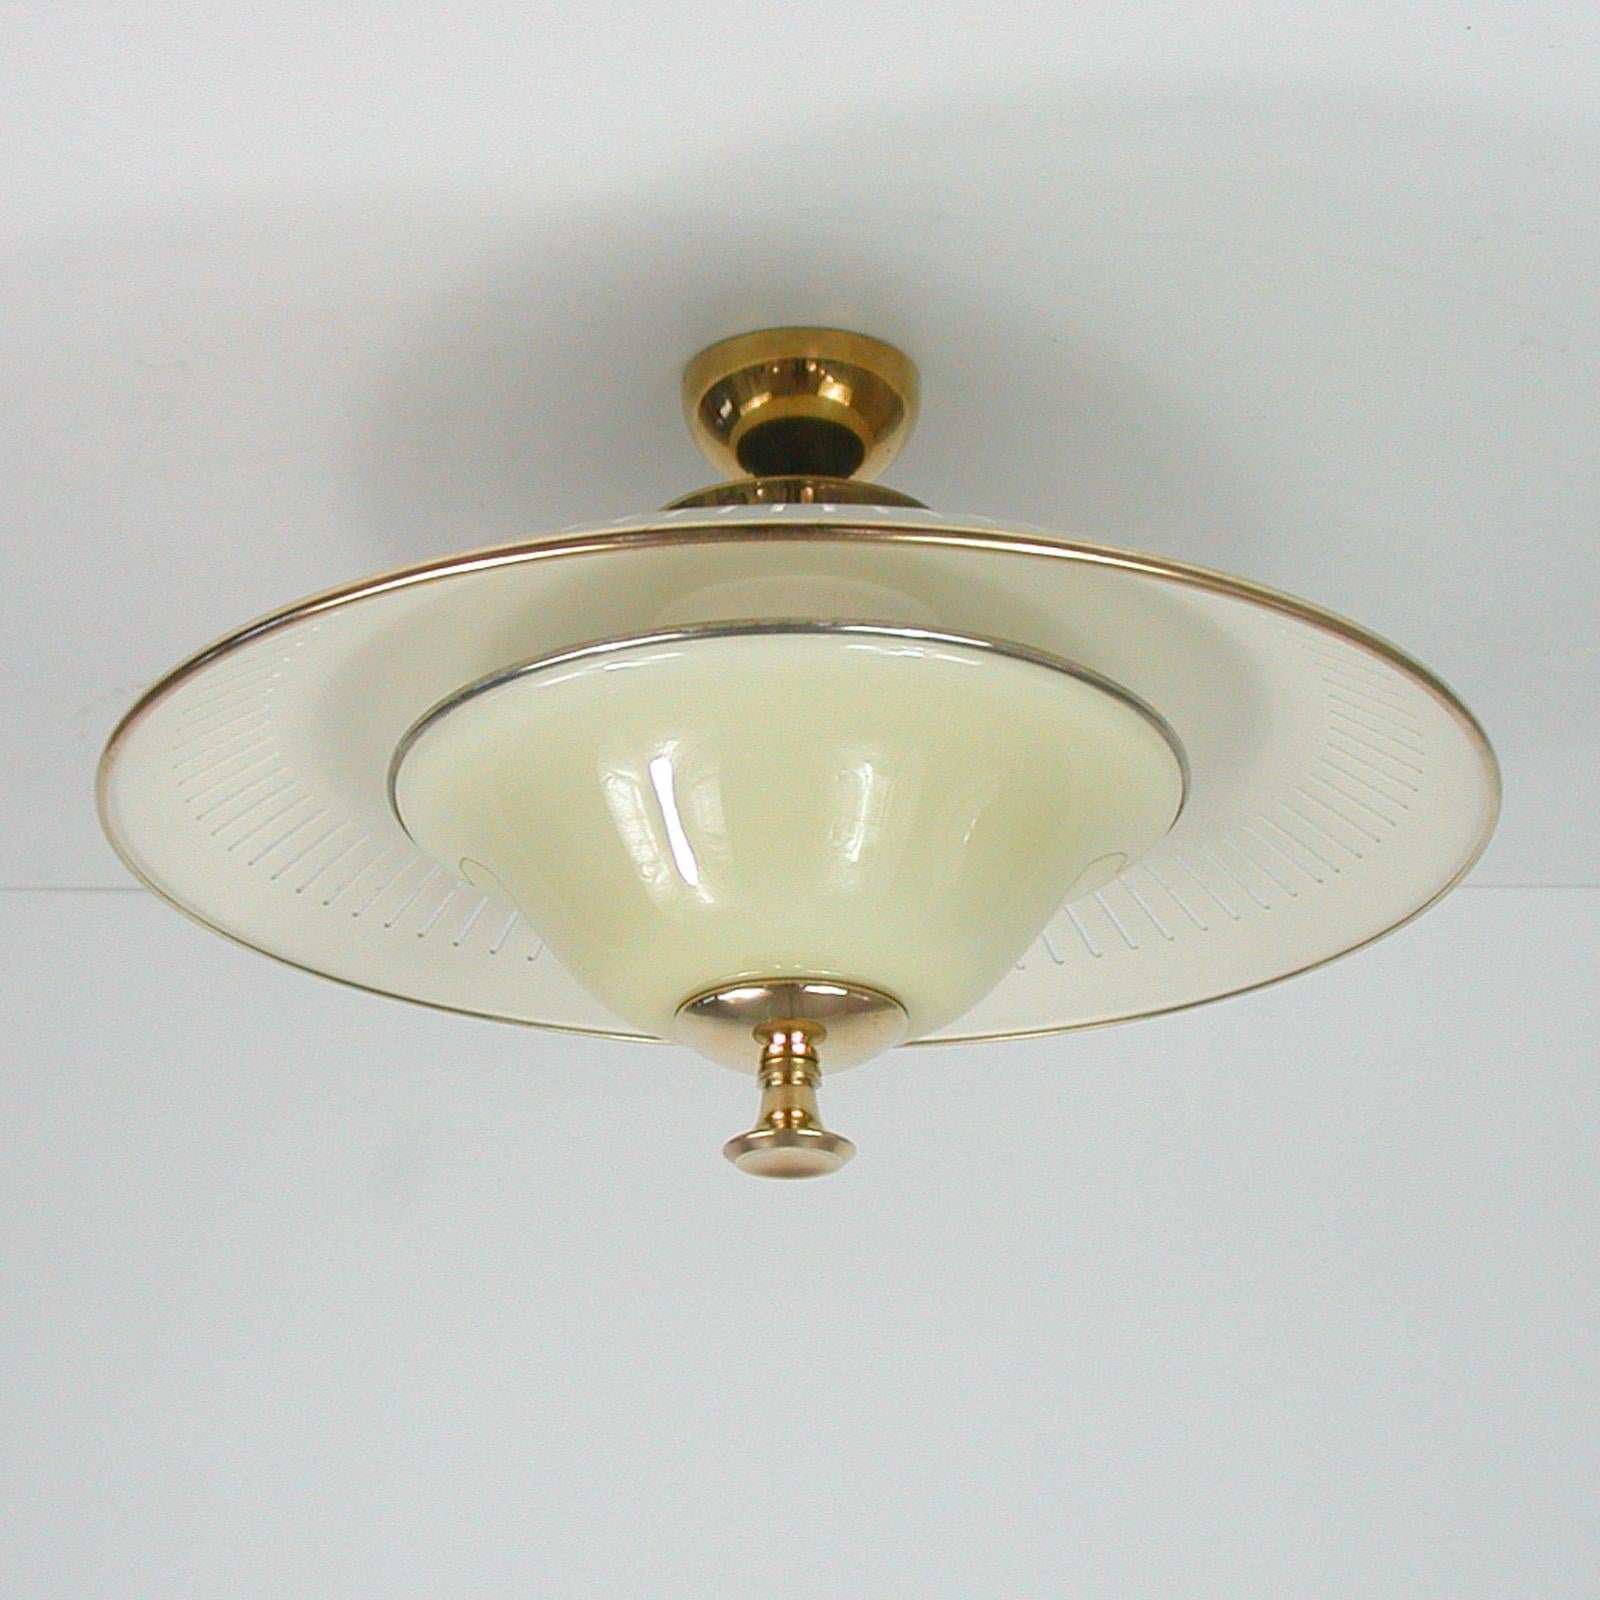 This beautiful midcentury semi flush mount was designed and manufactured in Italy in the 1950s. It features an ivory colored dome shaped lamp shade, a cream colored opaline diffuser and brass hardware.

The lamp has got 2 sockets for E27 bulbs up